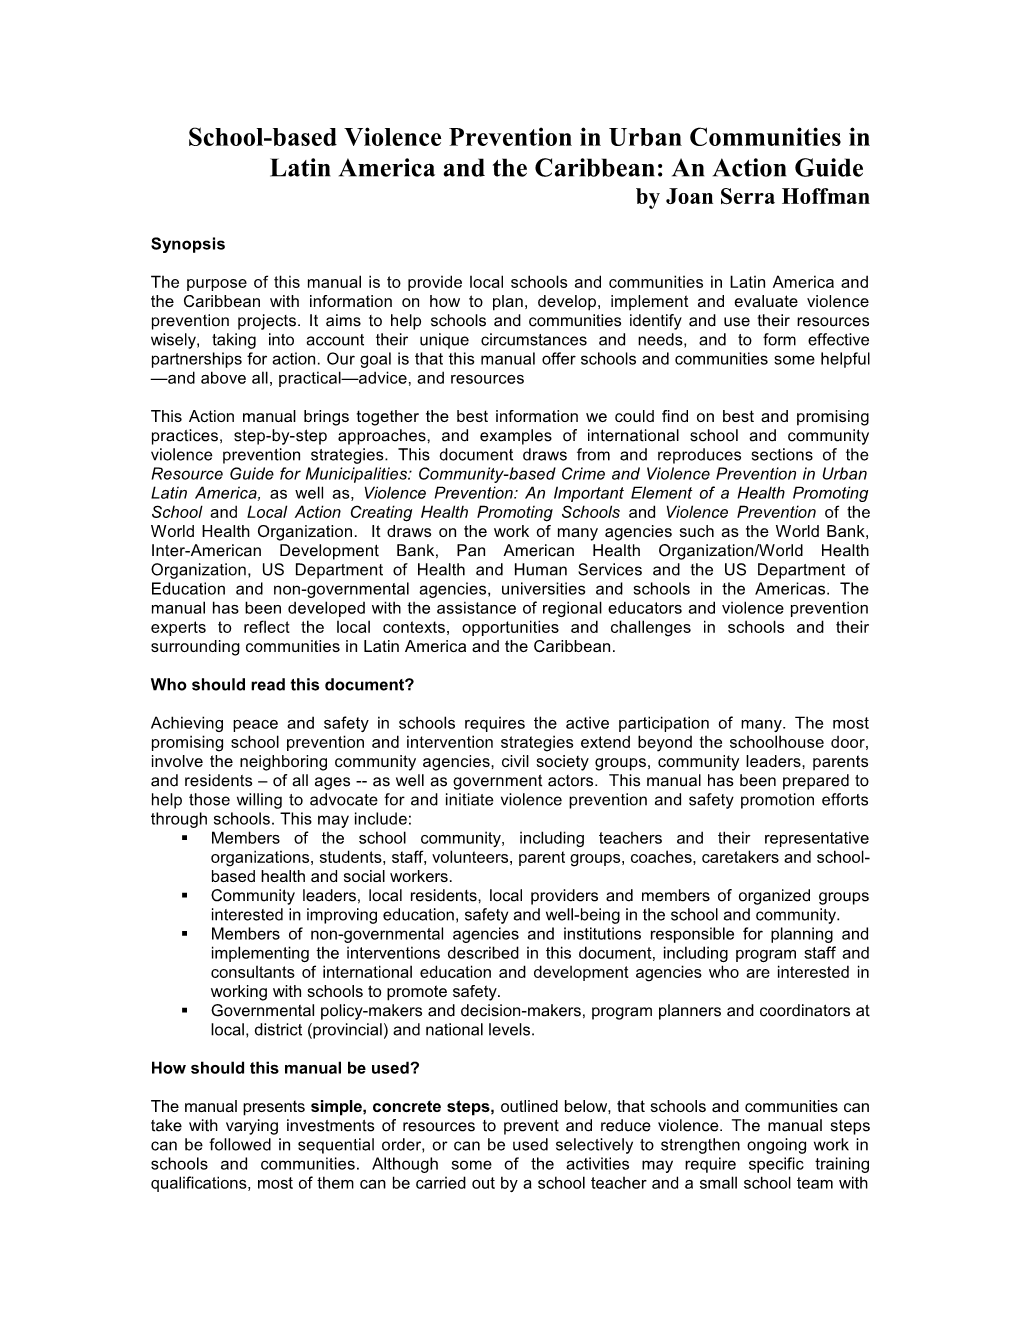 School-Based Violence Prevention in Urban Communities in Latin America and the Caribbean